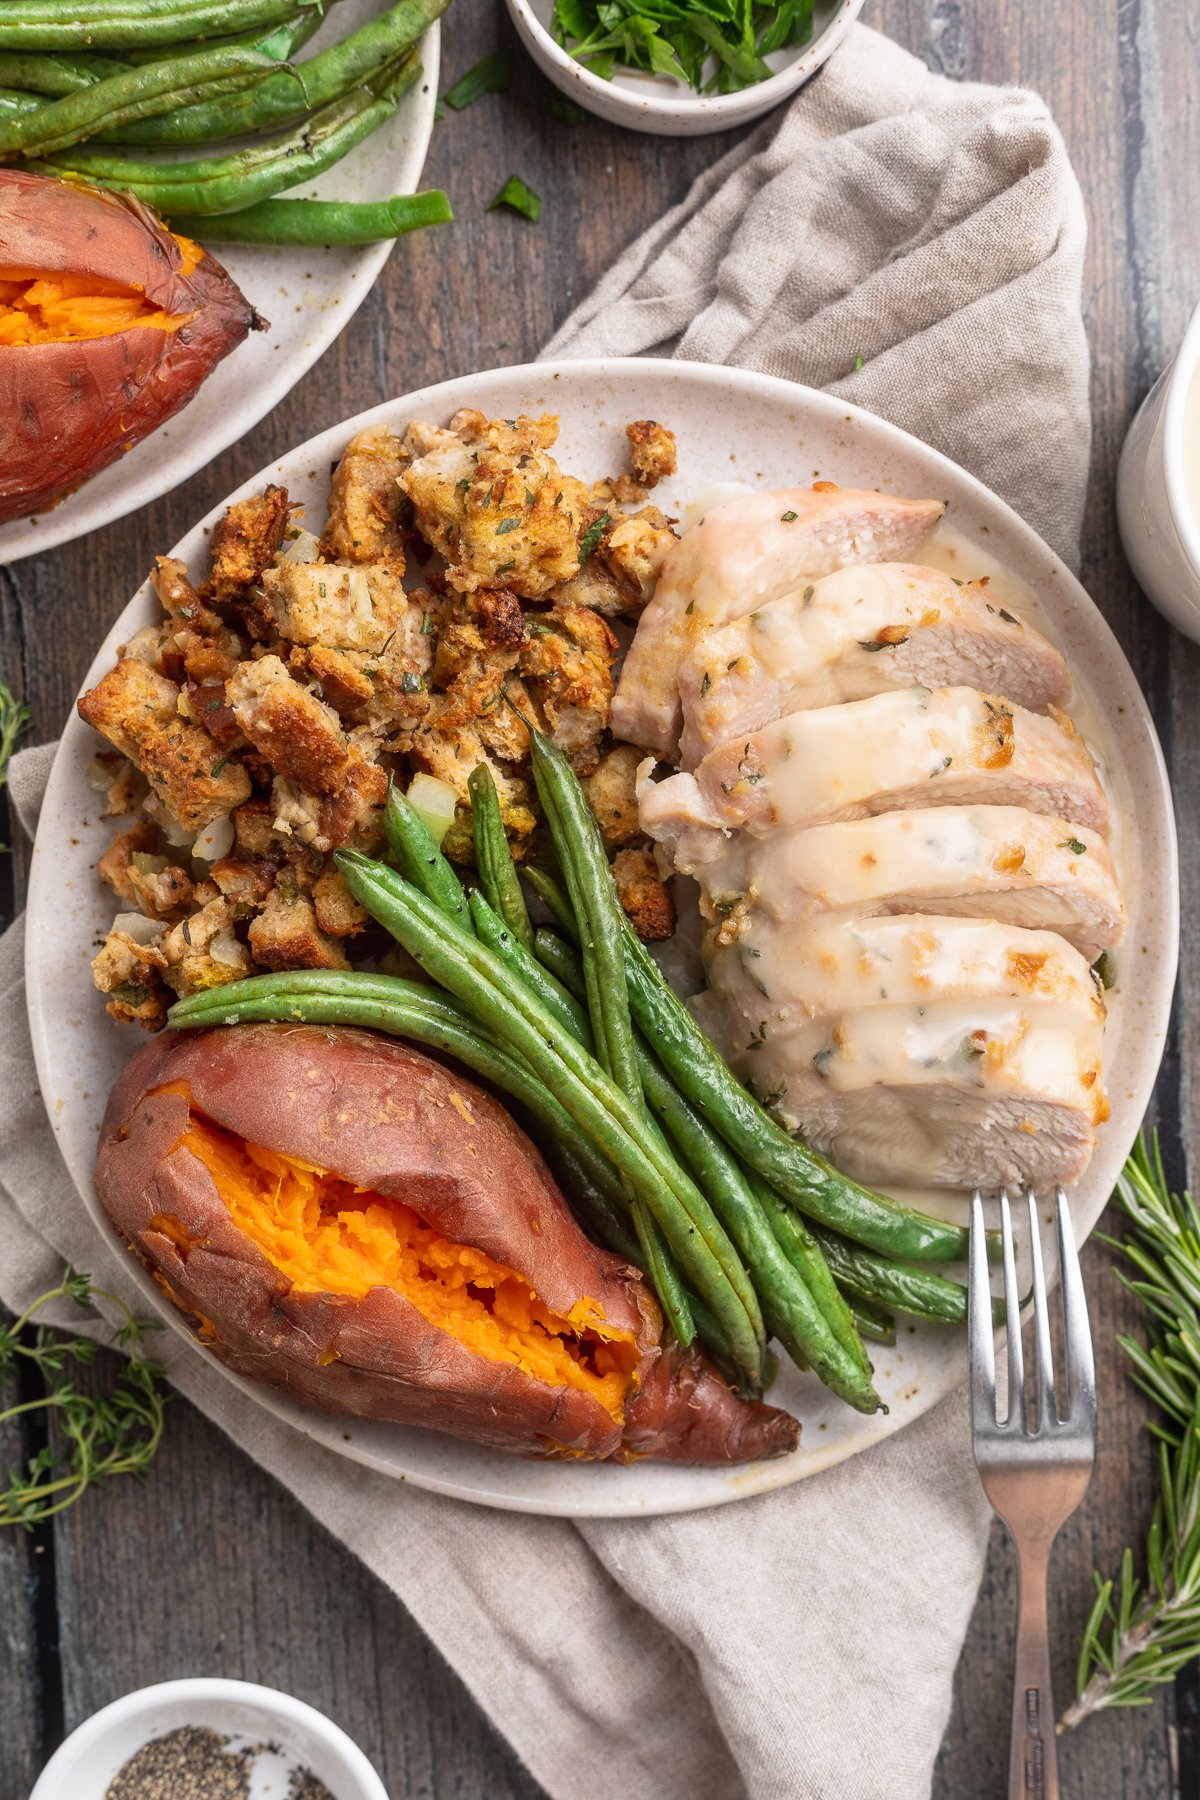 Overhead view of a one pan holiday meal fully plated on a round dinner plate, showcasing turkey, stuffing, green beans, and sweet potatoes.